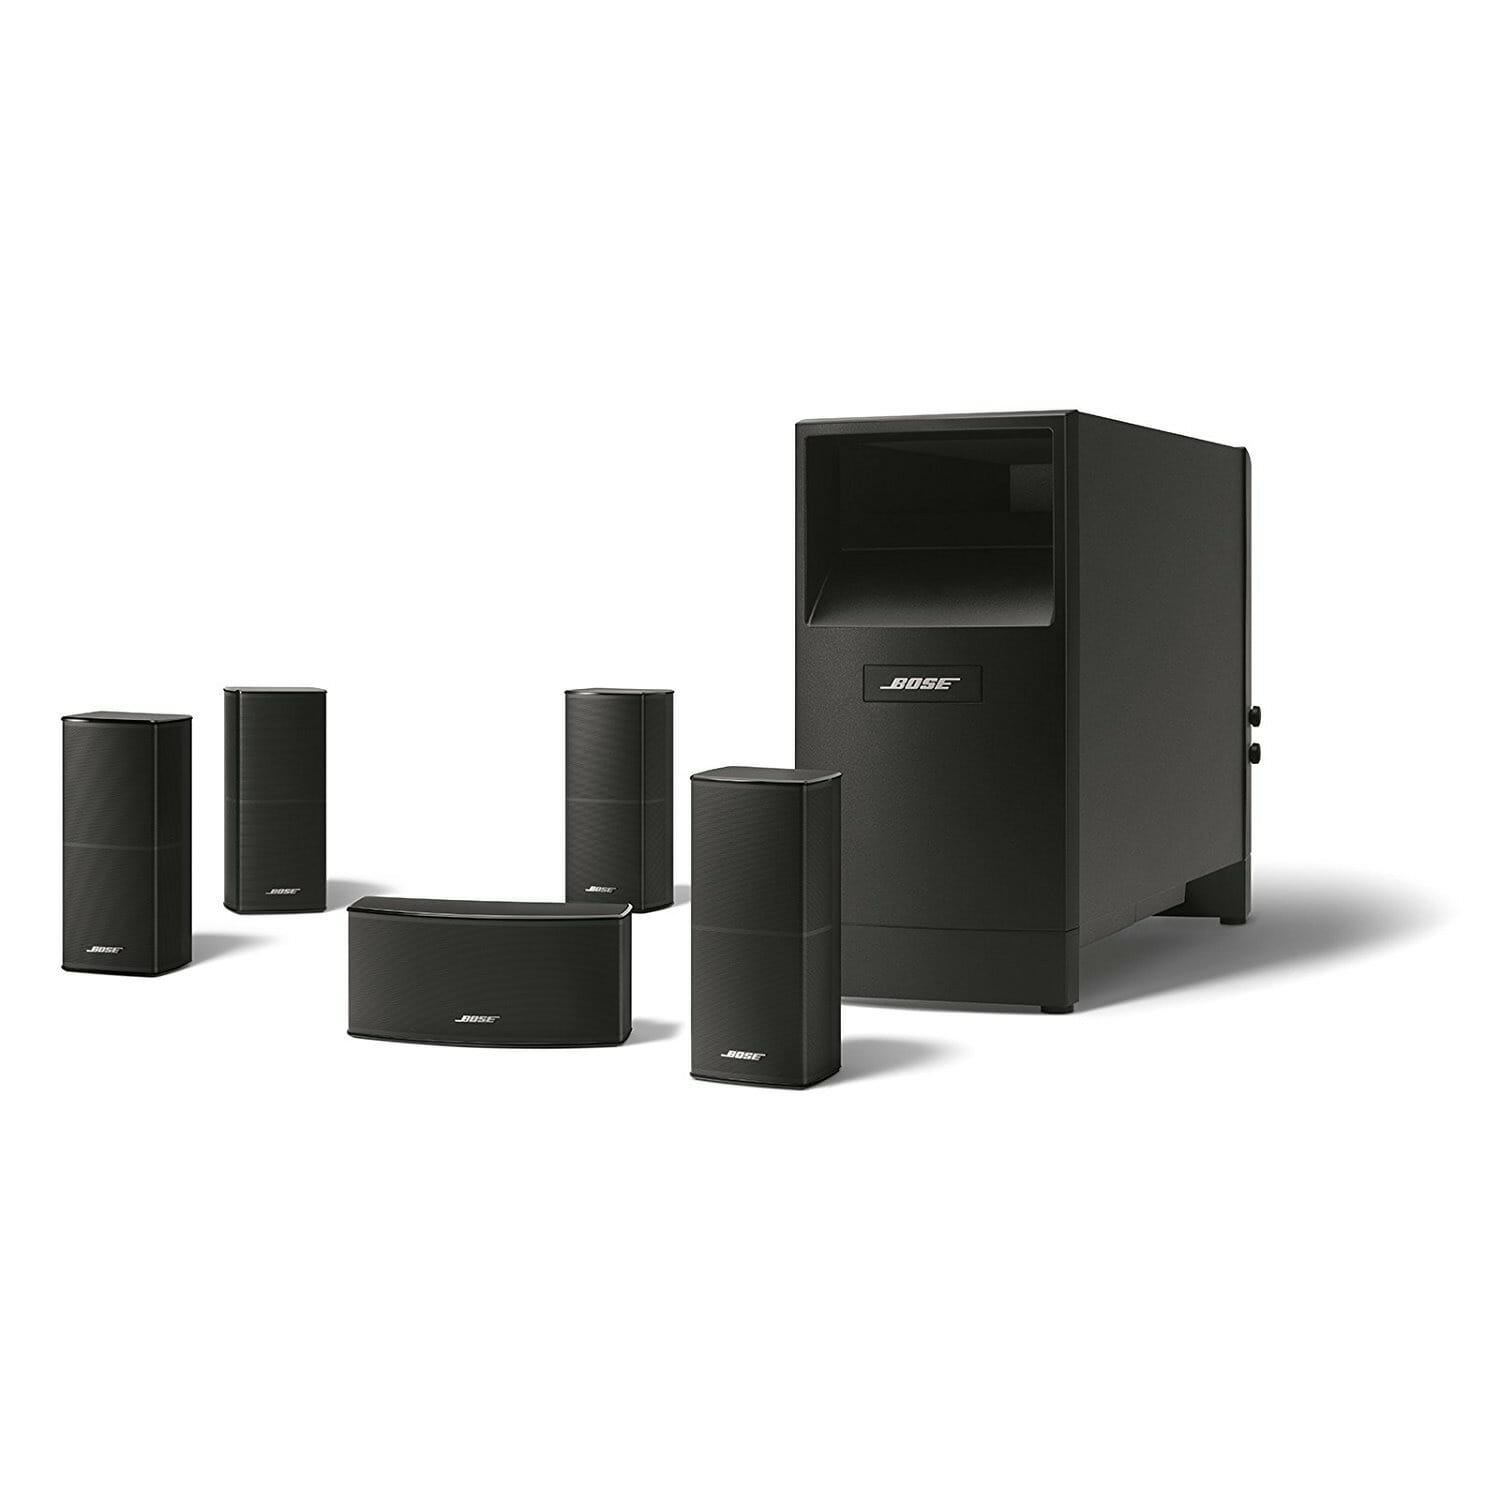 bose 7.1 home theater speakers